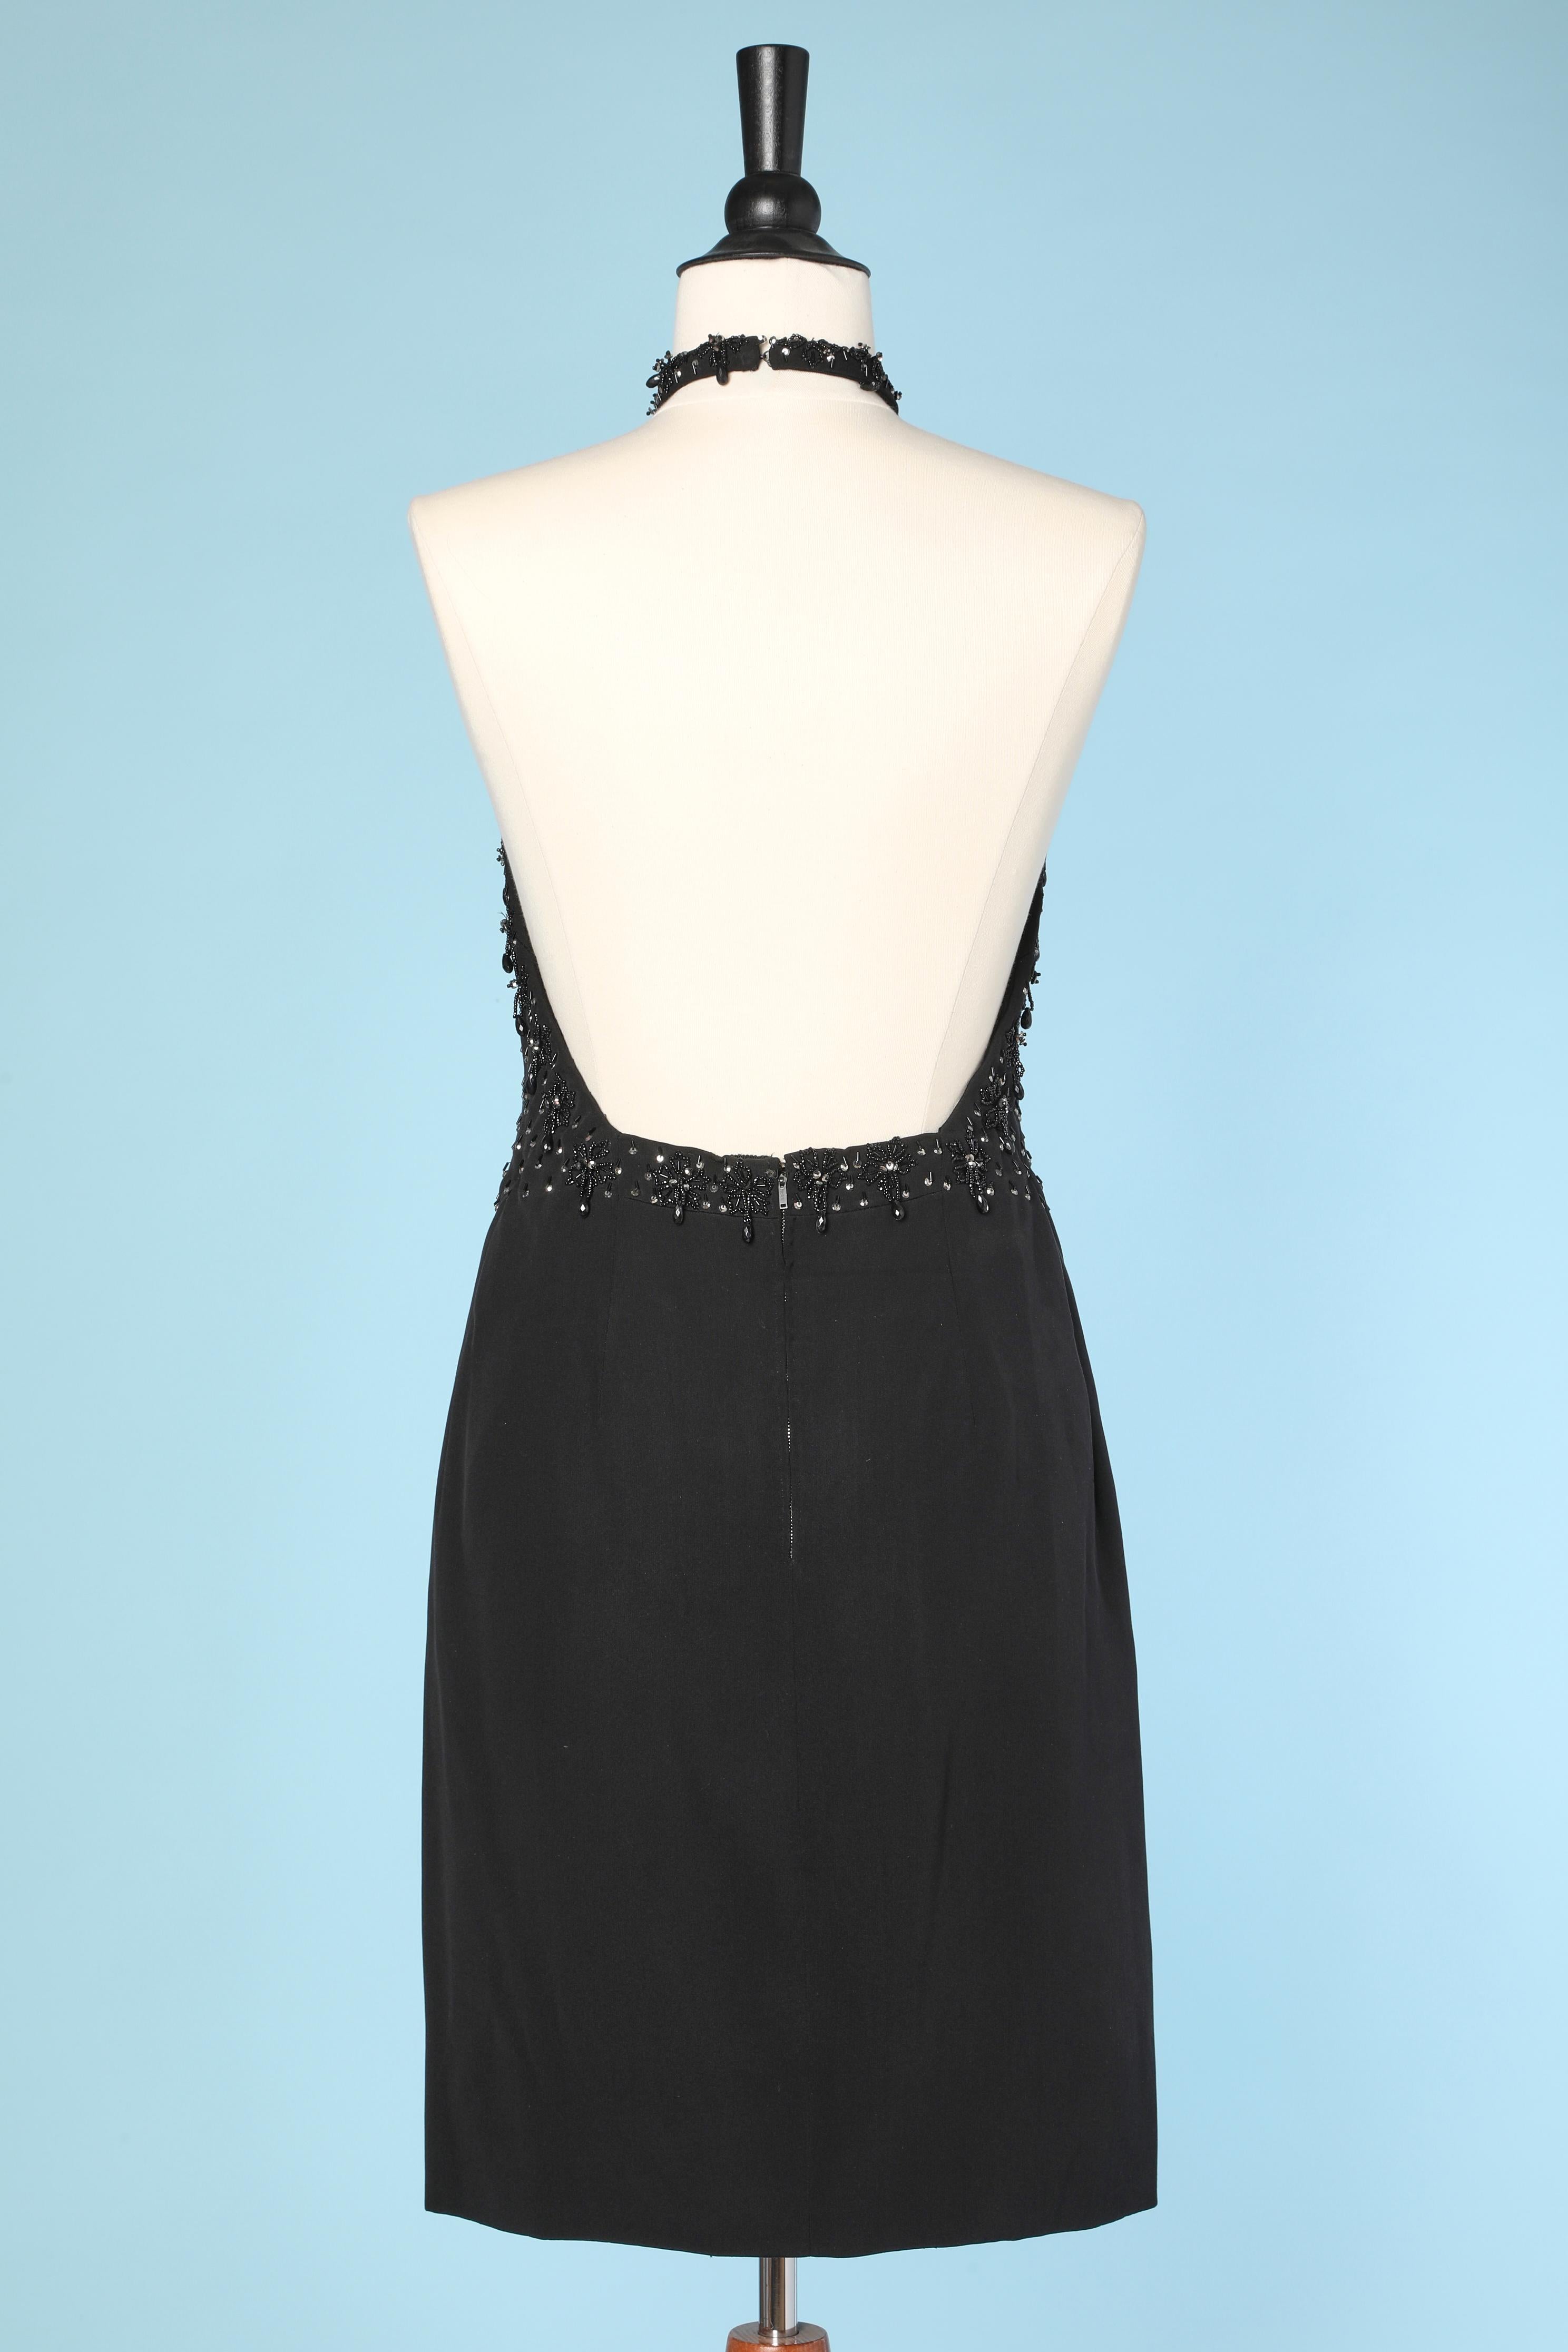 1960's black rayon cocktail dress with beaded work on the bust.
SIZE: 38 ( Fr) 